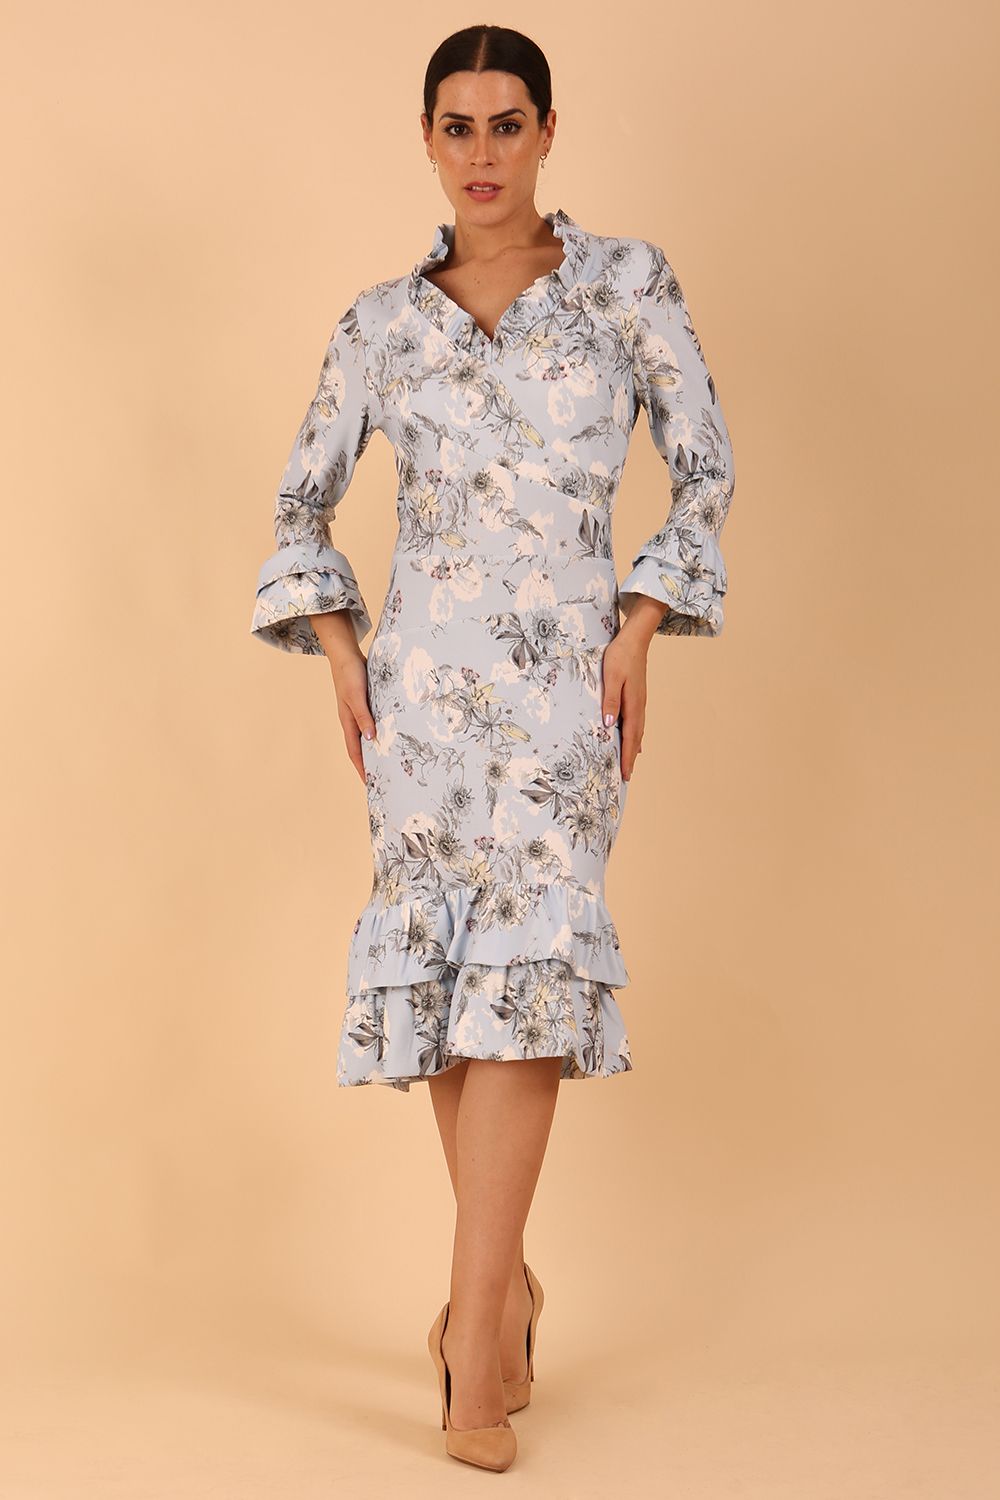 model is wearing diva catwalk fern printed dress with rushes and sleeves in light blue front